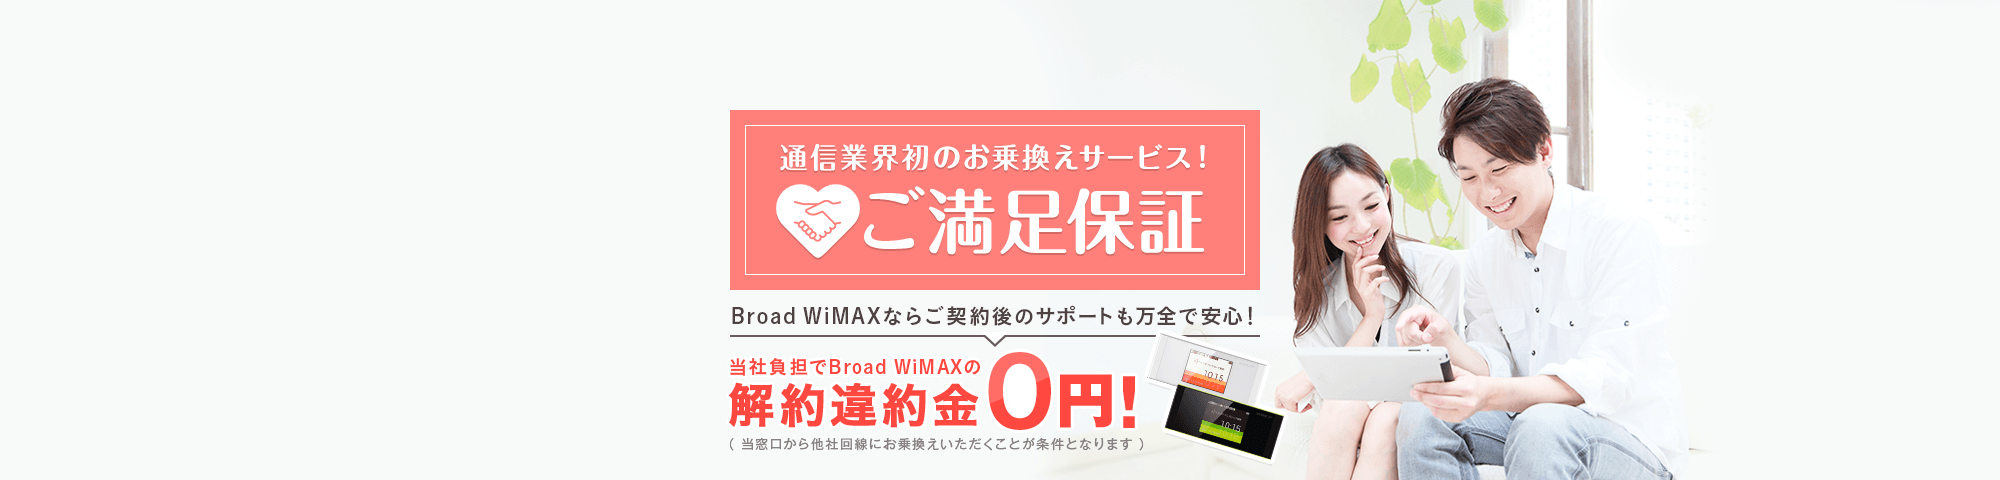 Broad WiMAX 2000×480_3のバナーデザイン